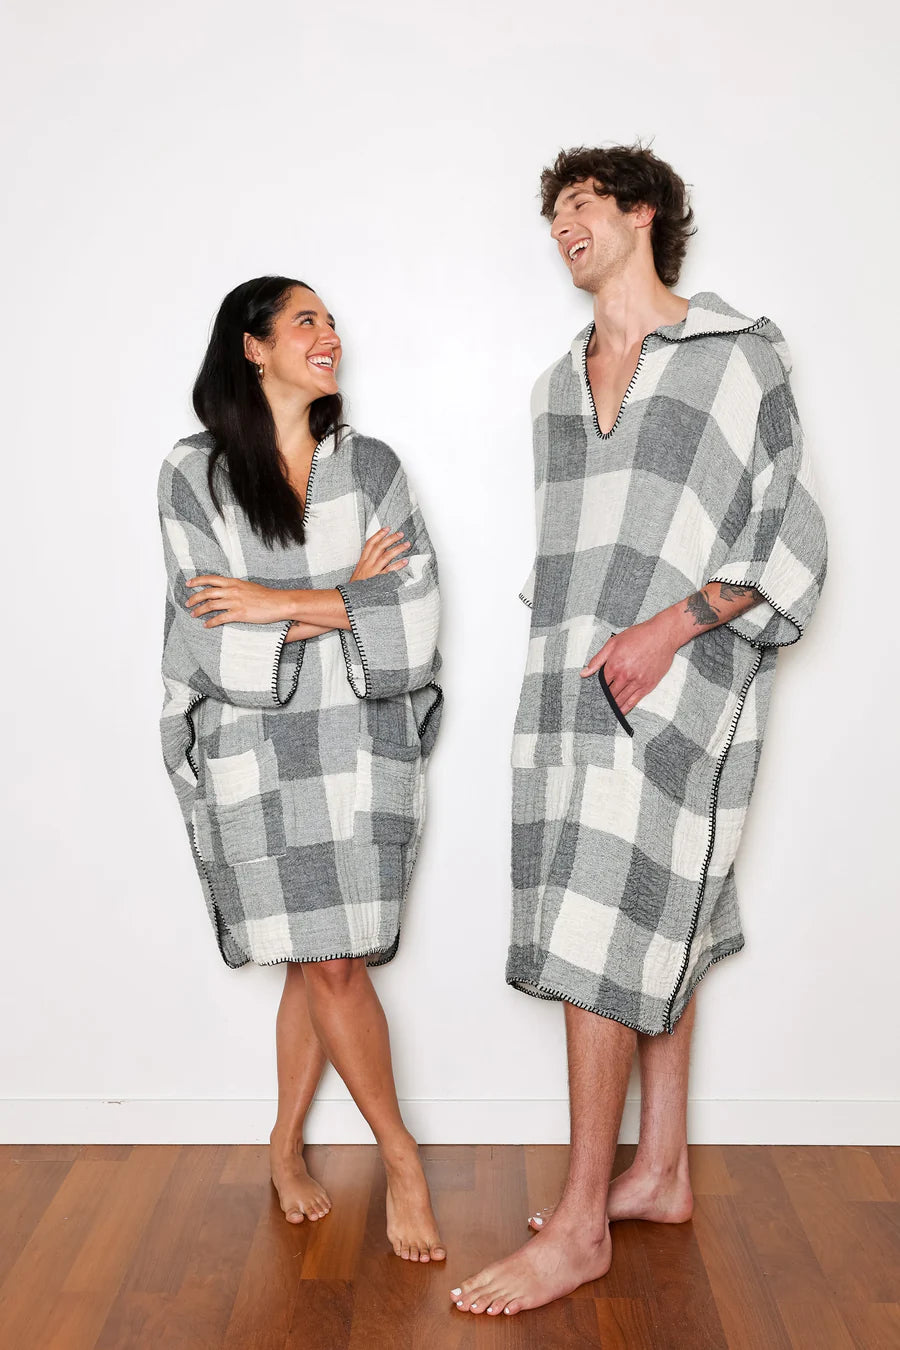 The Limited Edition Plaid Cocoon Poncho| Men's